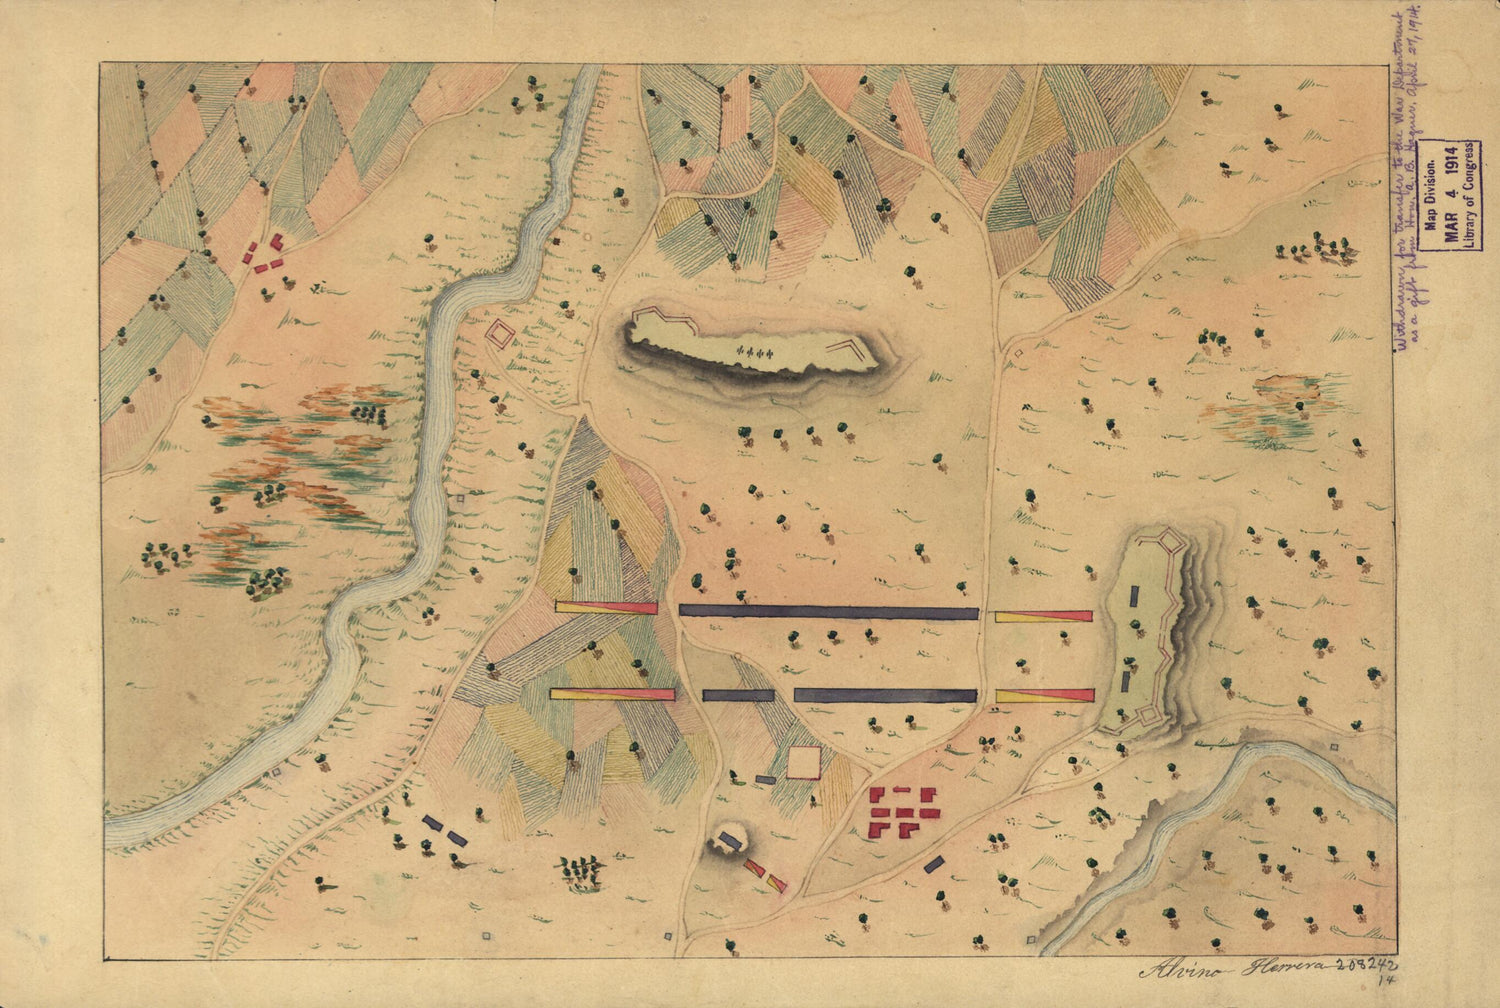 This old map of Manuscript Map of Mexican War Campaign In Mexico from 1848 was created by Alvino Herrera in 1848